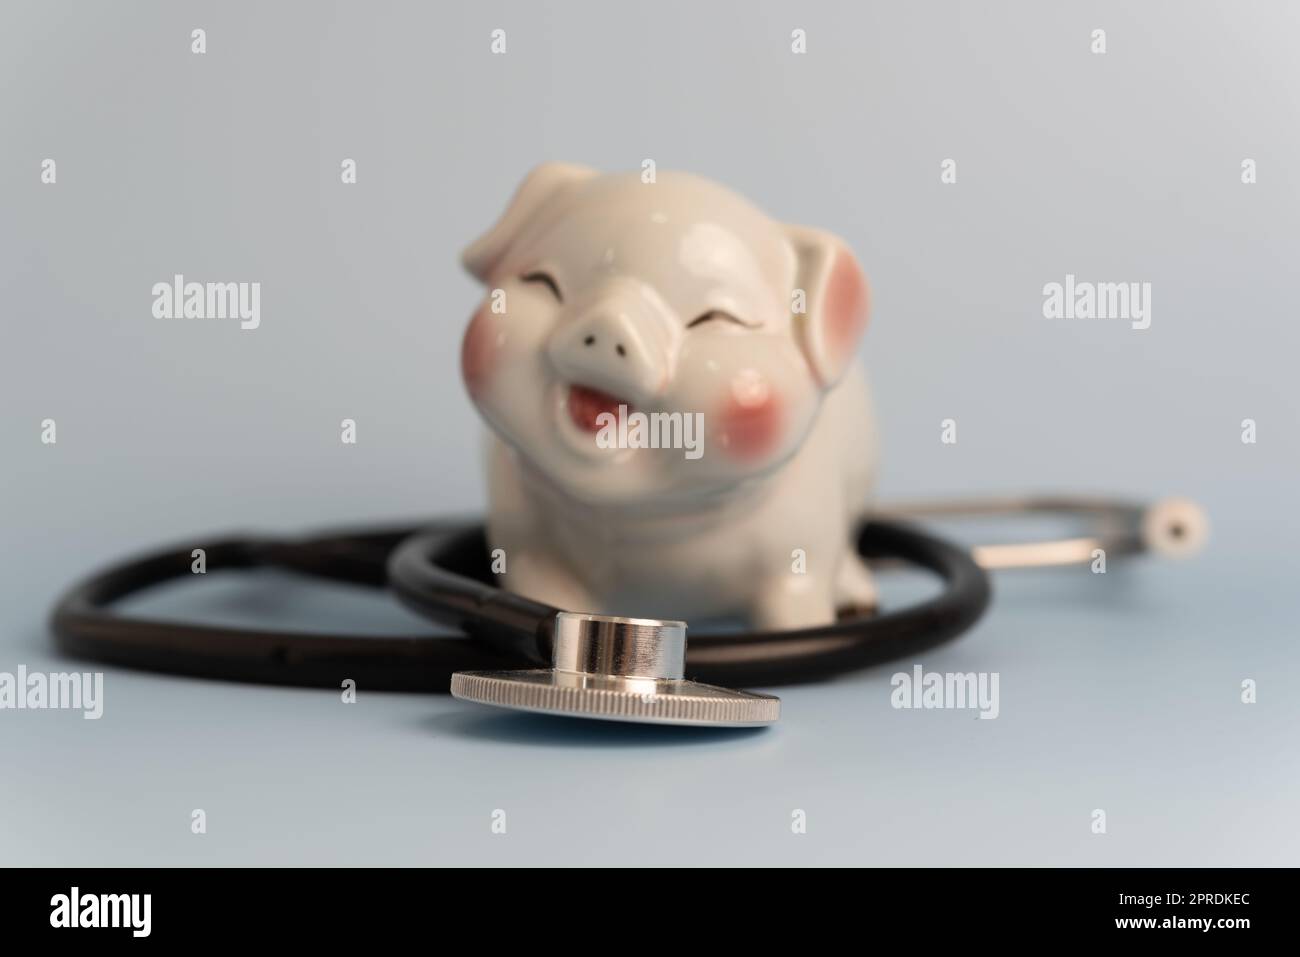 medical stethoscope piggy bank business concept insurance investment health care and saving money. Stock Photo